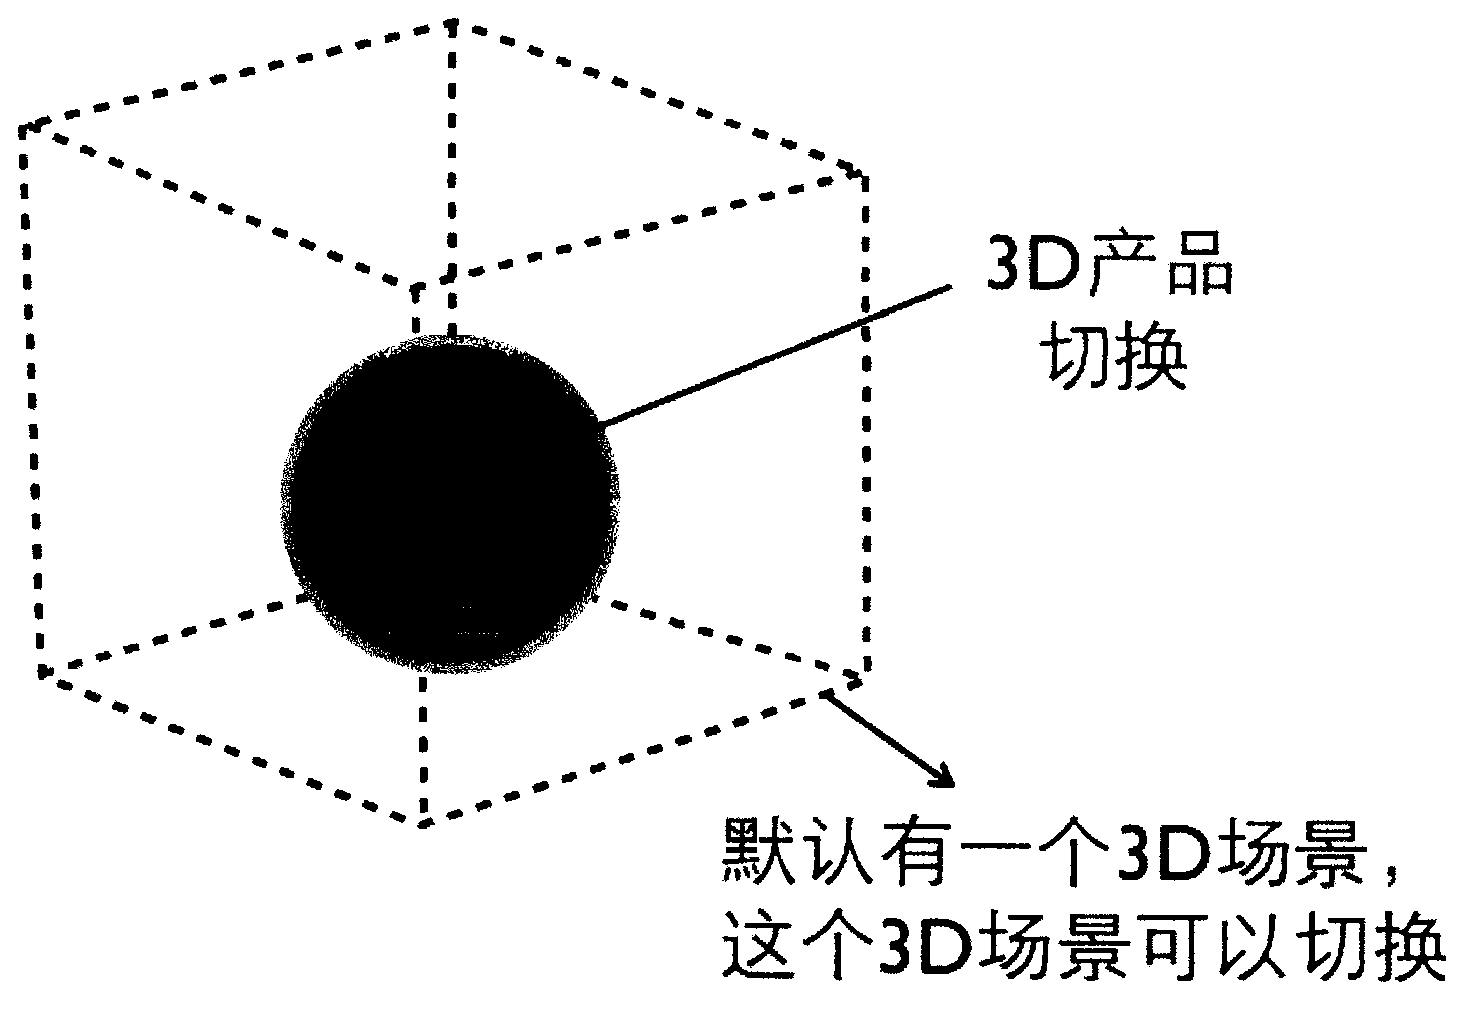 Online experience system of three dimensional products